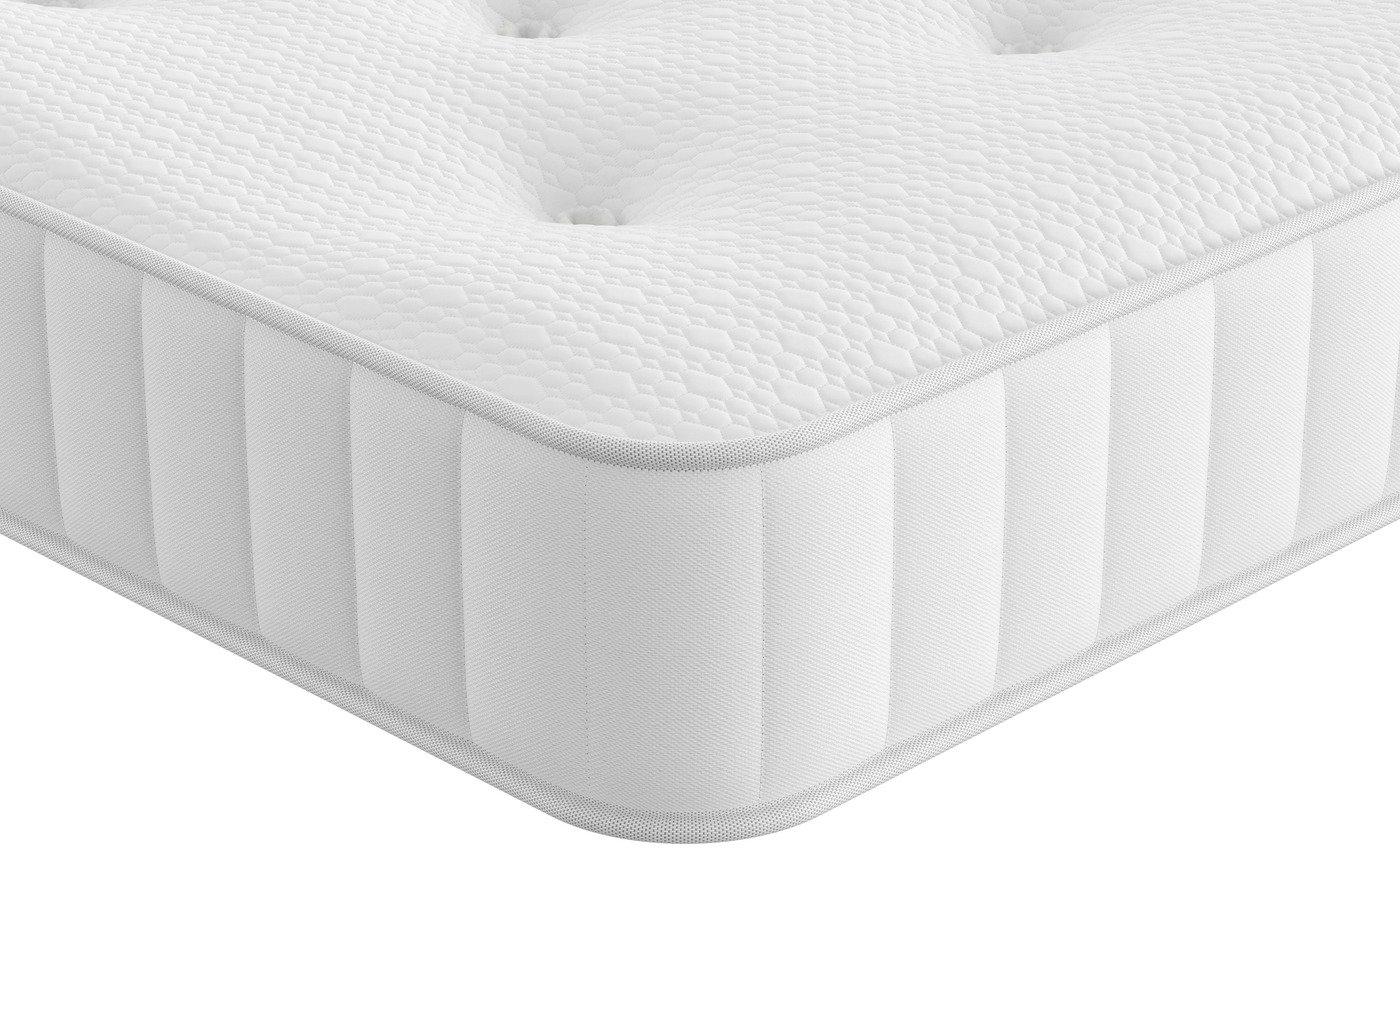 isolate coils vs traditional spring mattress